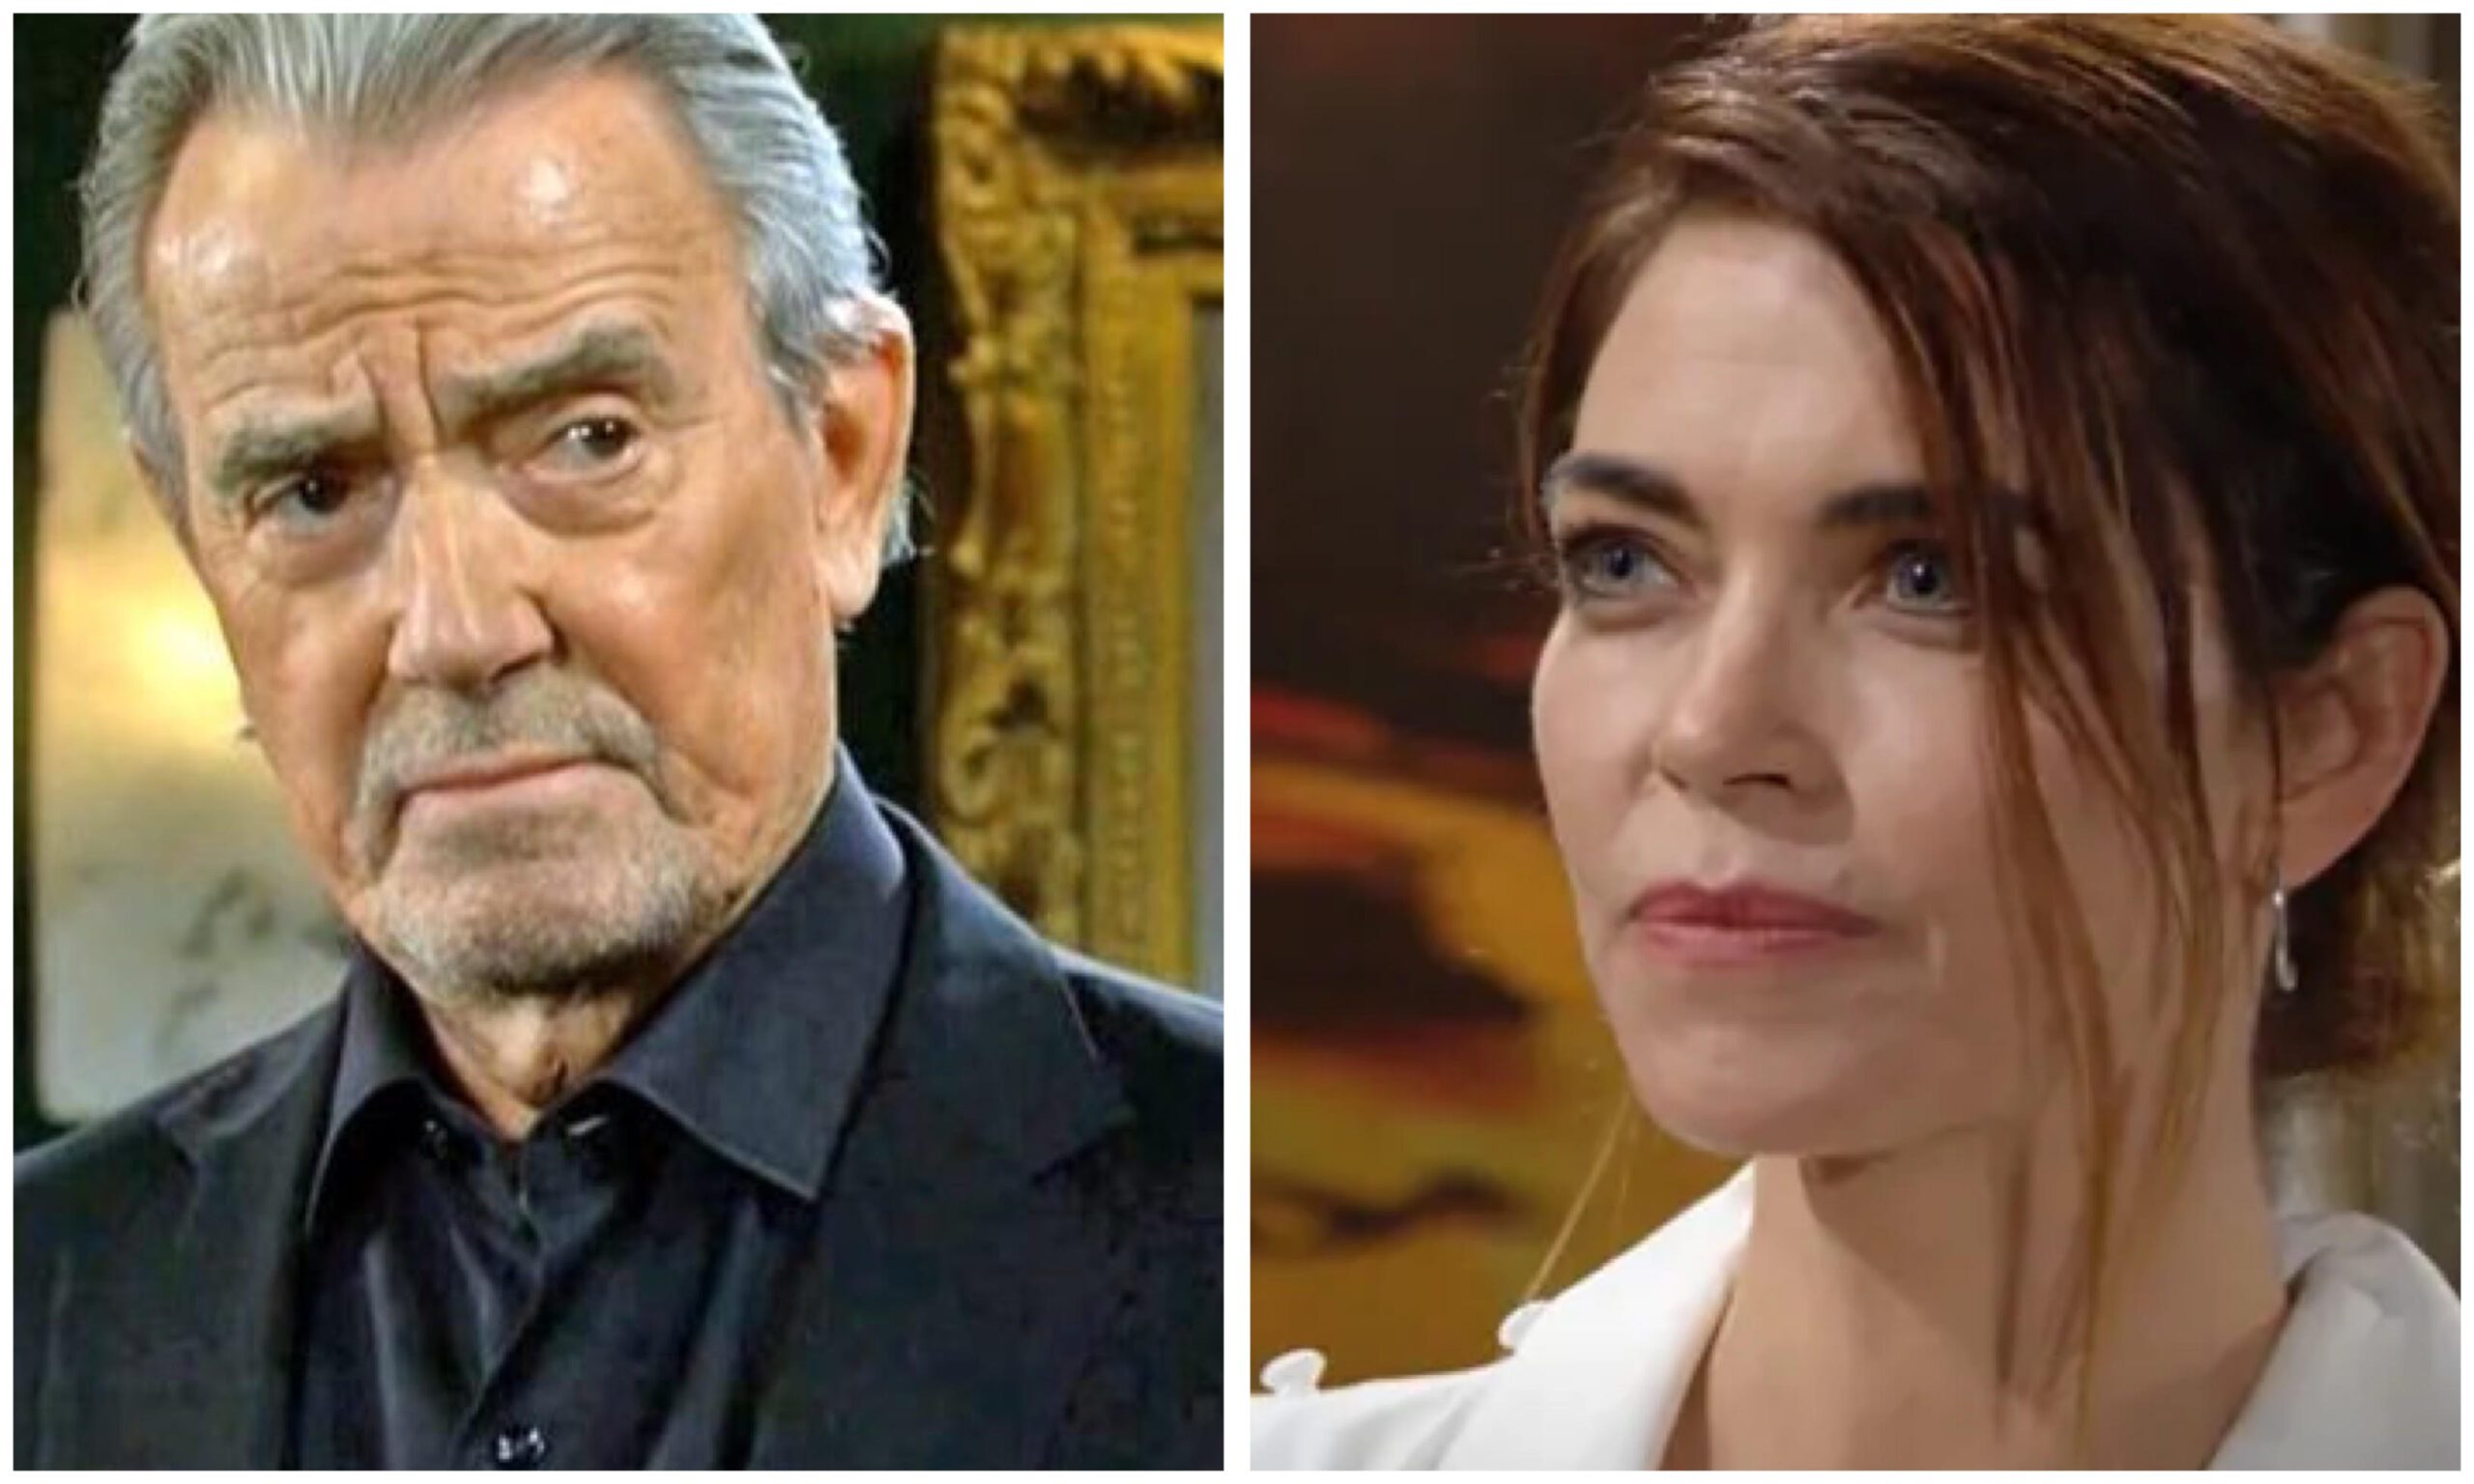 The Young and the Restless spoilers Victoria Newman Victor Newman